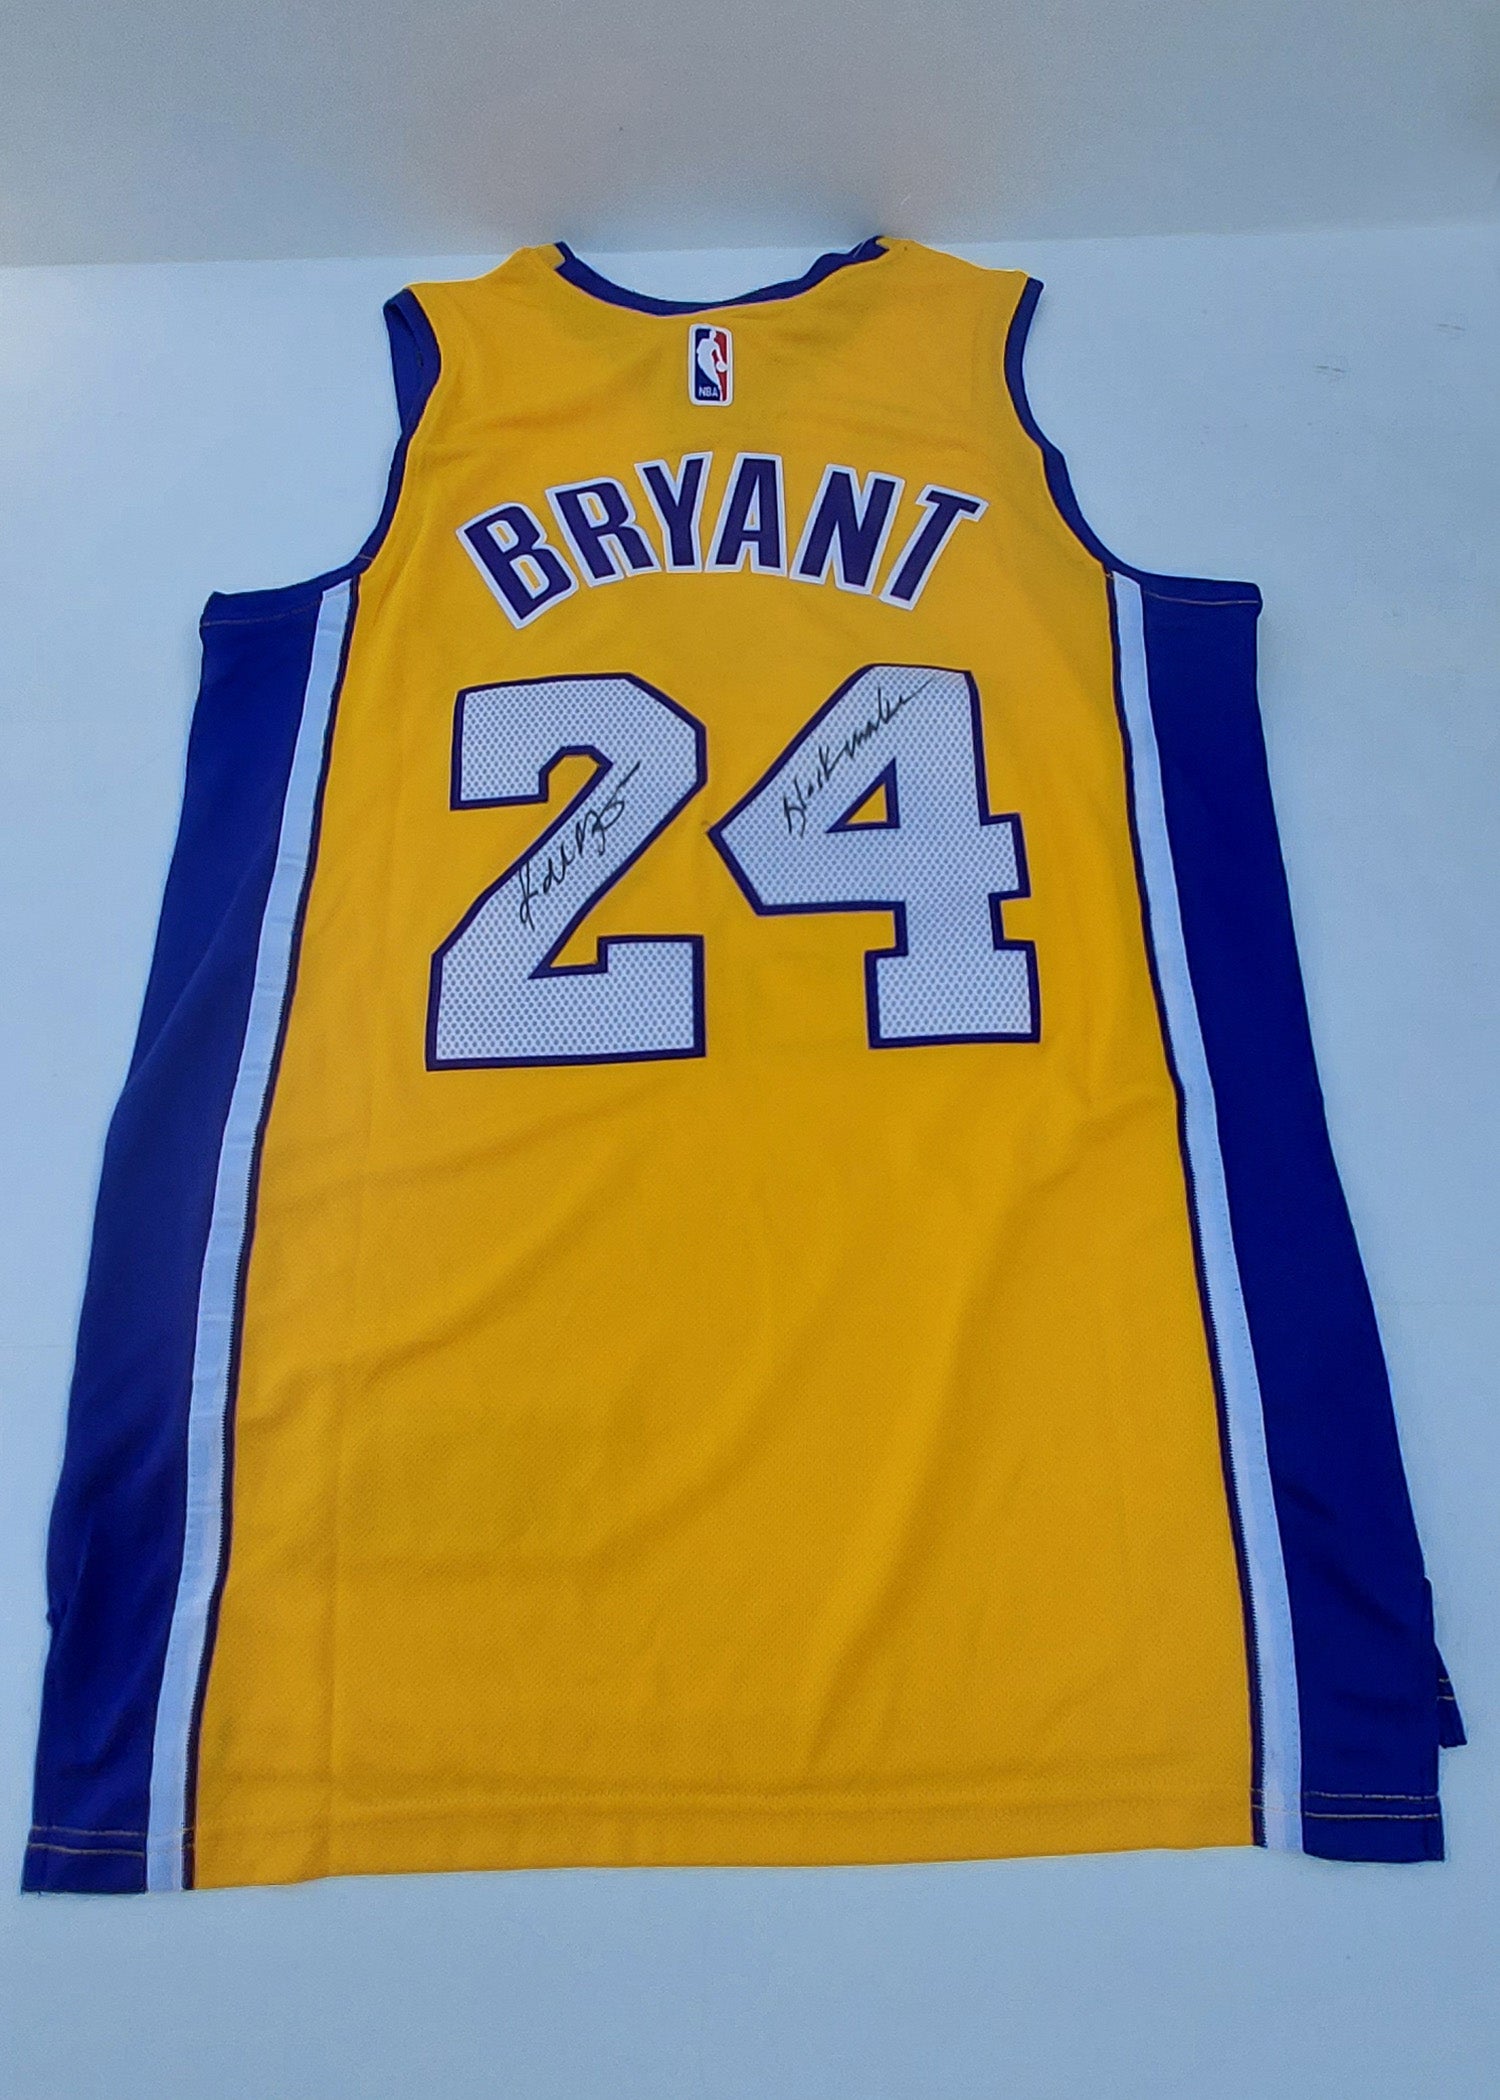 Kobe Bryant Los Angeles Lakers signed game YELLOW model jersey with proof